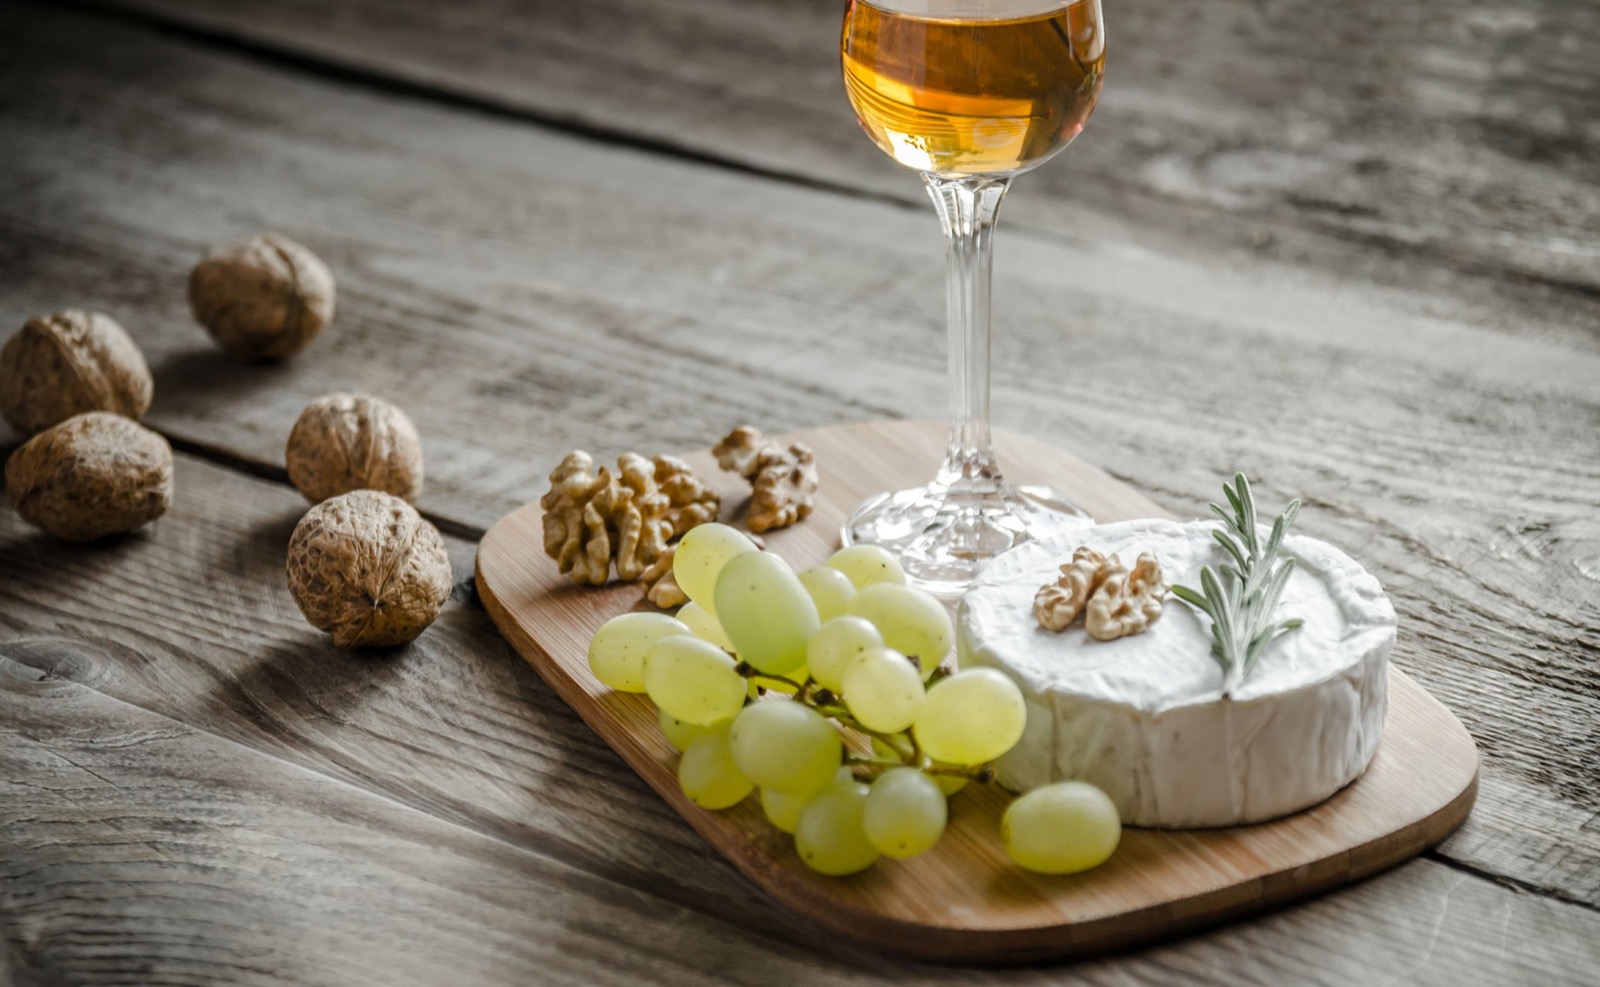 Say “Yum” Or “Yuck” to These Food Pairings to Find Out If You Are More Creative or Logical Wine and cheese